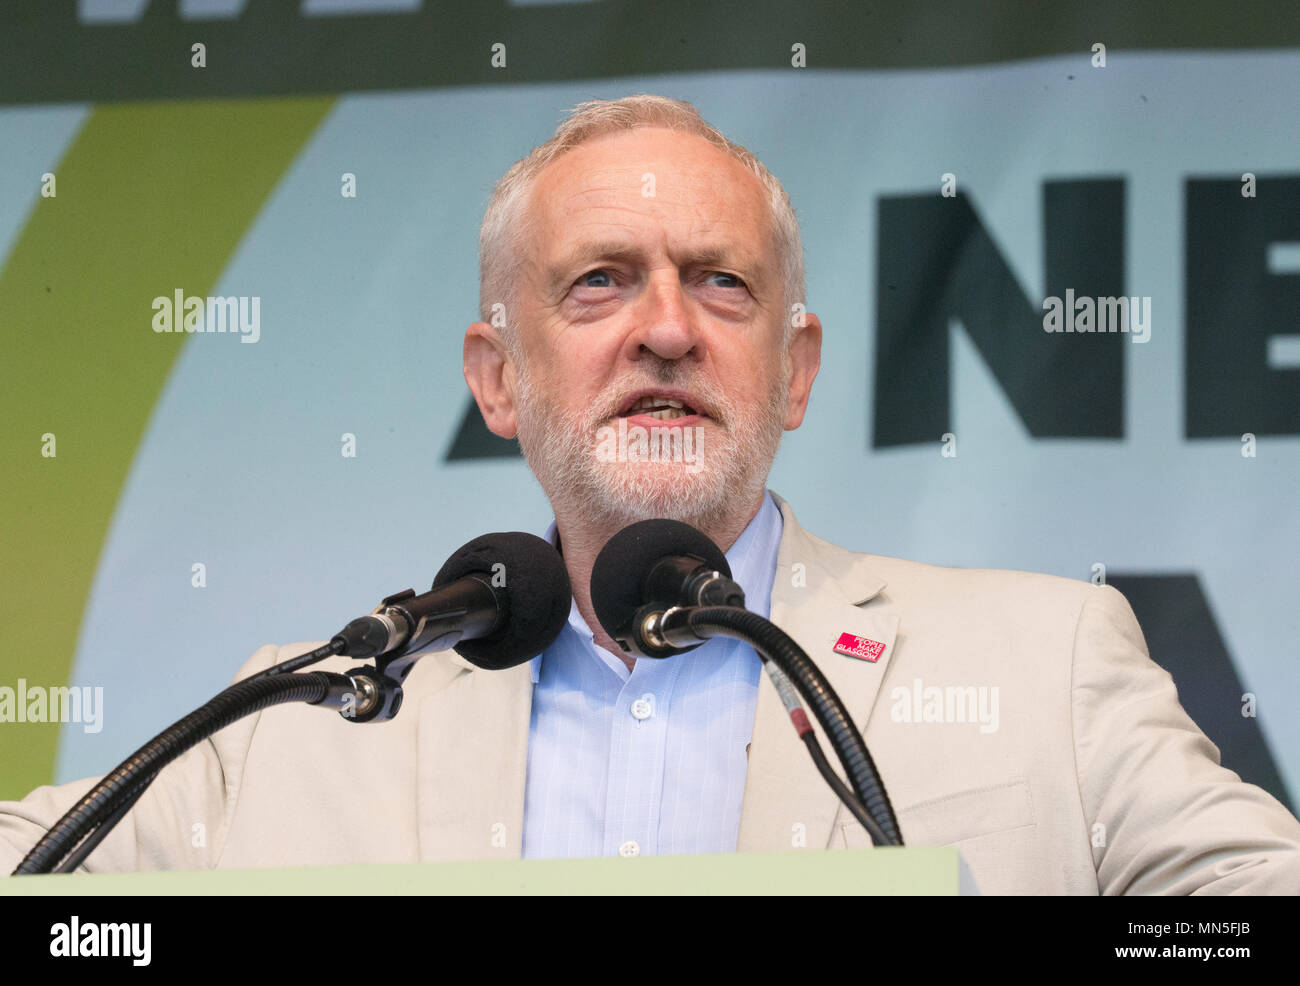 Labour Leader, Jeremy Corbyn, speaks at the TUC Rally 'A New deal for working people' in Hyde Park Stock Photo